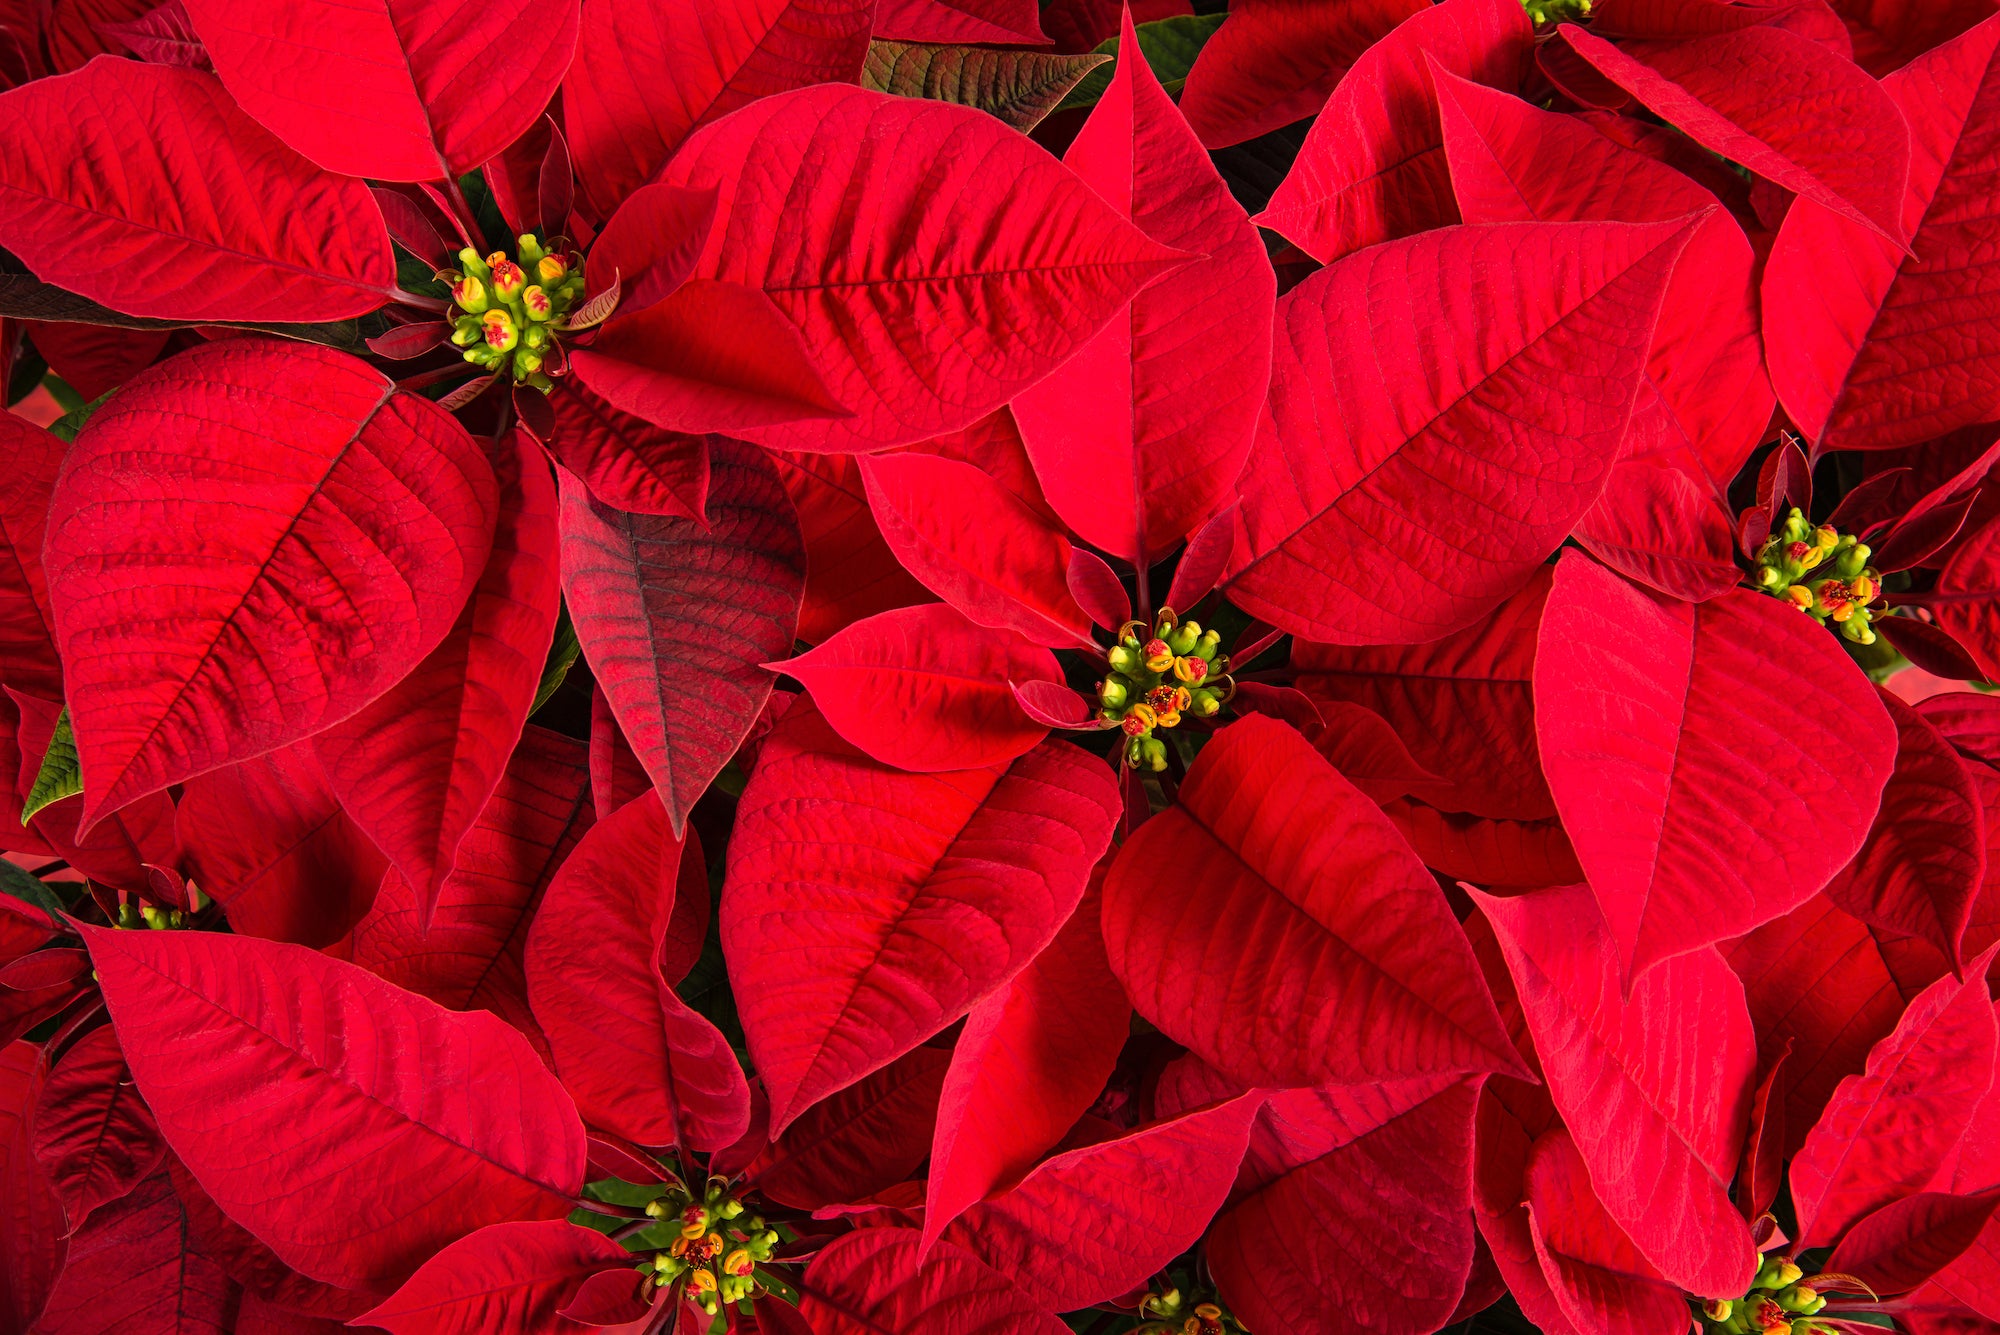 Making Your Poinsettia Last